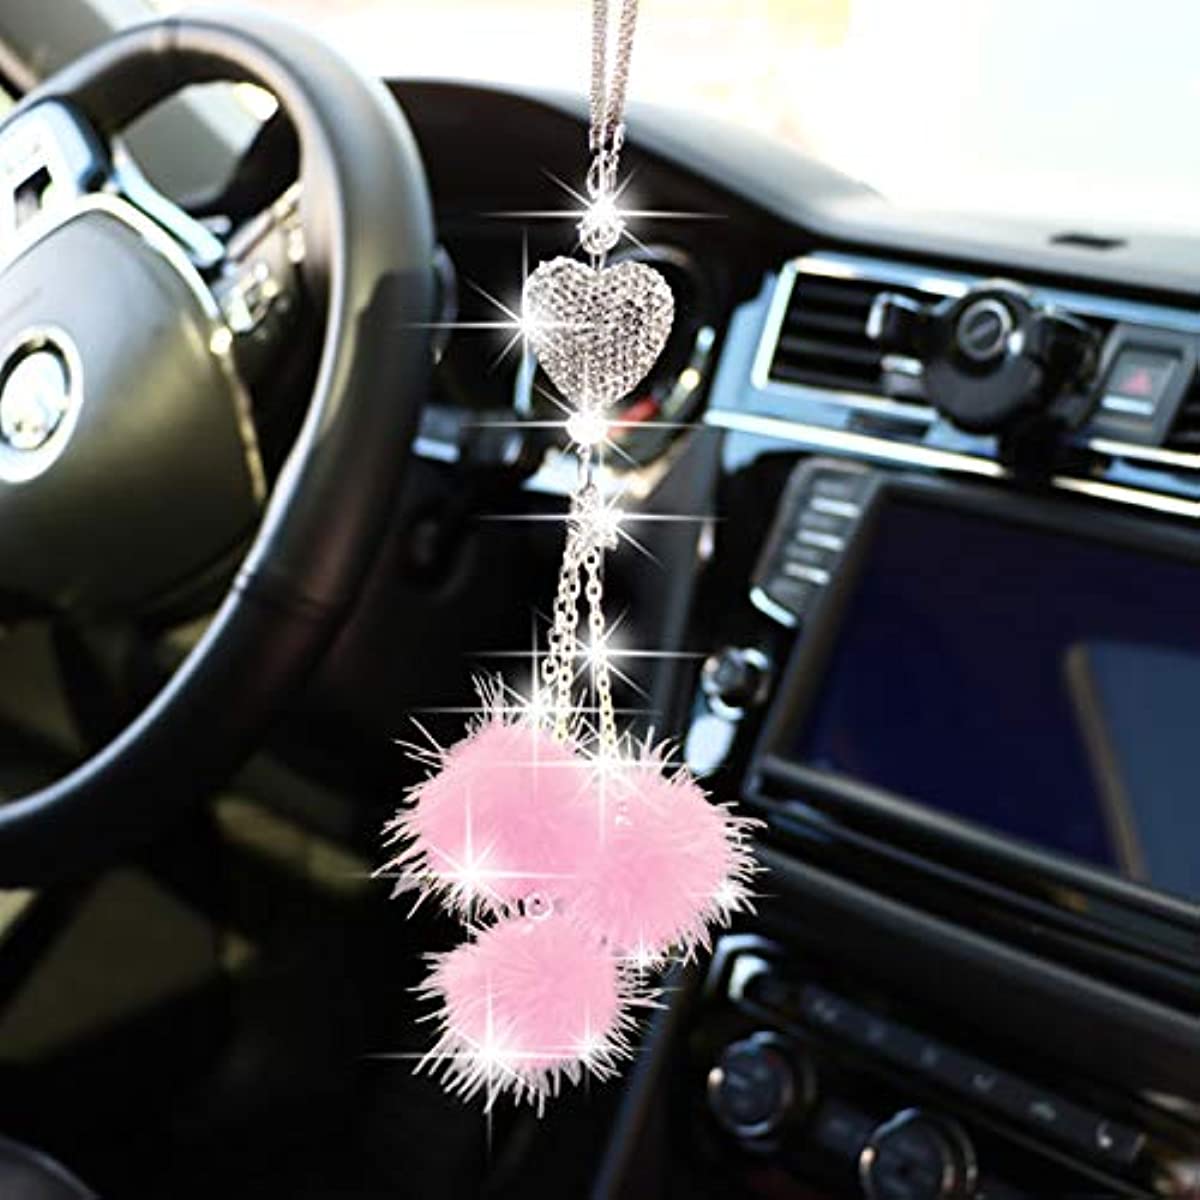 Car Bling Rear View Mirror Hanging Accessories for Women & Men, Rhinestones  Diamond Love Heart and Red Plush Ball Crystal Sun Catcher Lucky Ornament  Chain, Car Chandelier, Bling Car Charm 